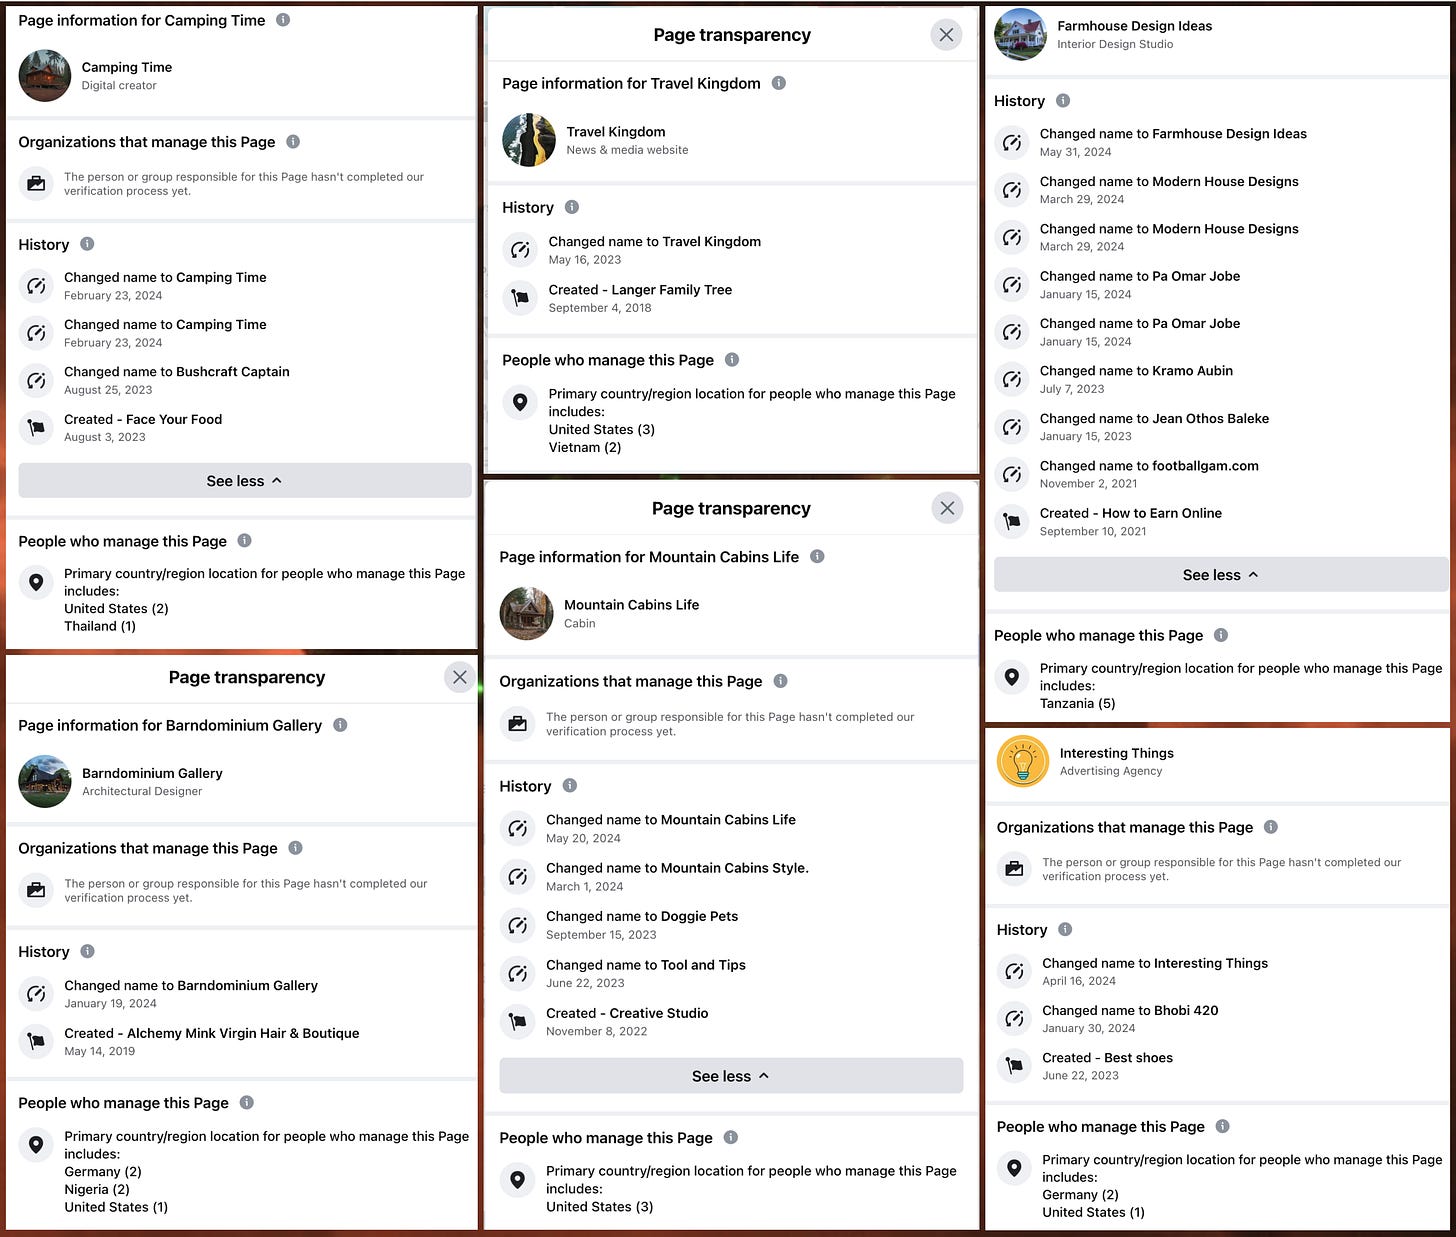 screenshots of the Page Transparency section for six Facebook accounts, showing each has been renamed at least once